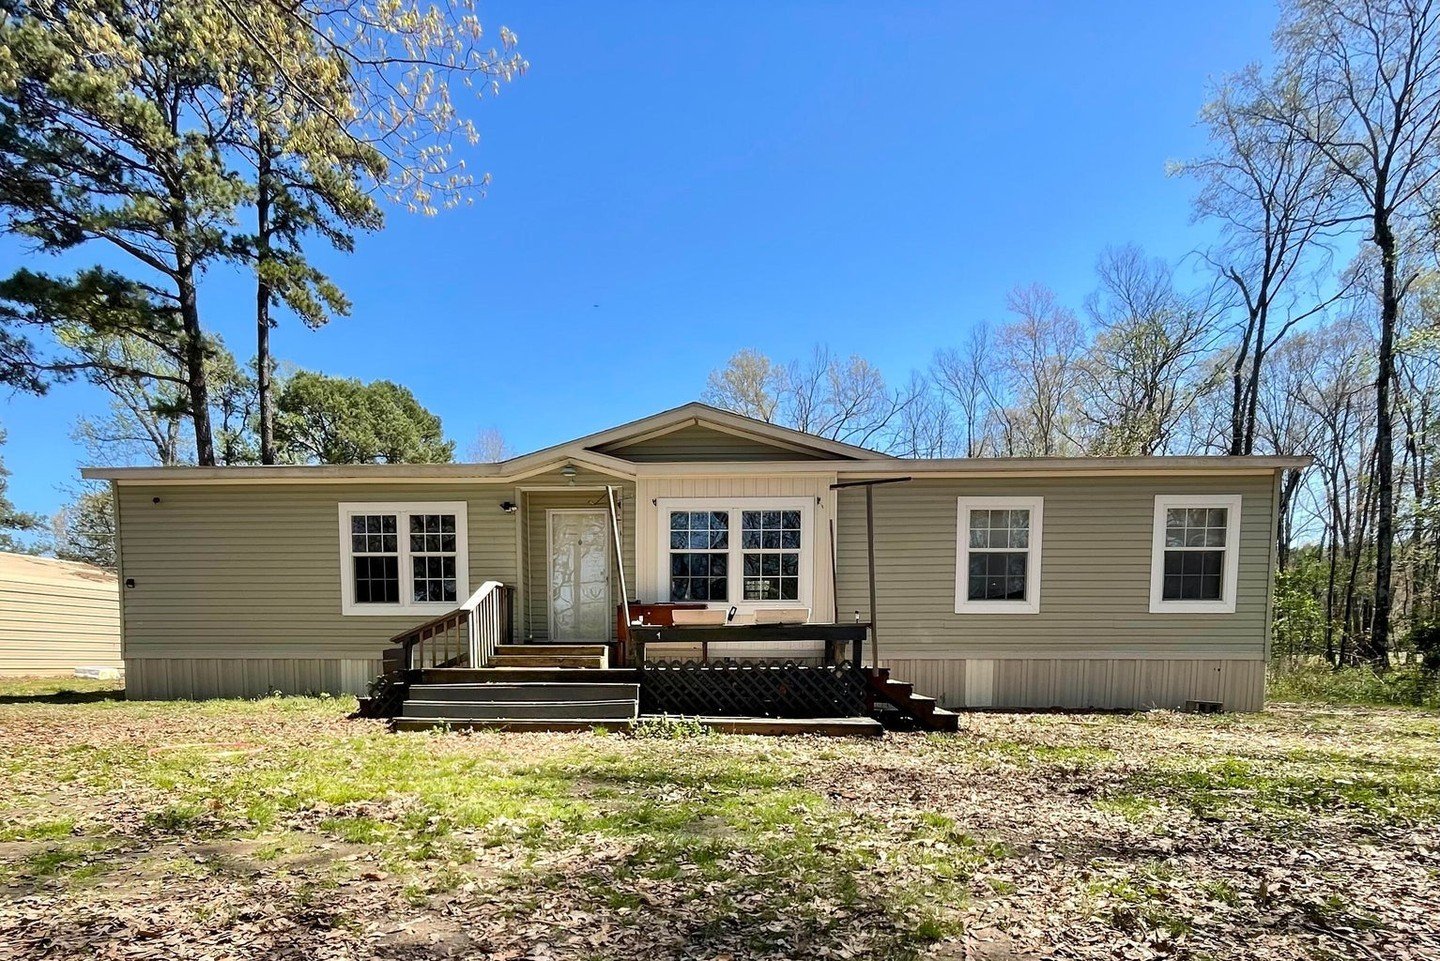 Take a closer look at 1204 AR-95! 👀

Nestled on 5.73 acres in Morrilton and surrounded by serene woods, this charming property offers both tranquility and convenience. With a storm shelter for added peace of mind, the home features an inviting open 